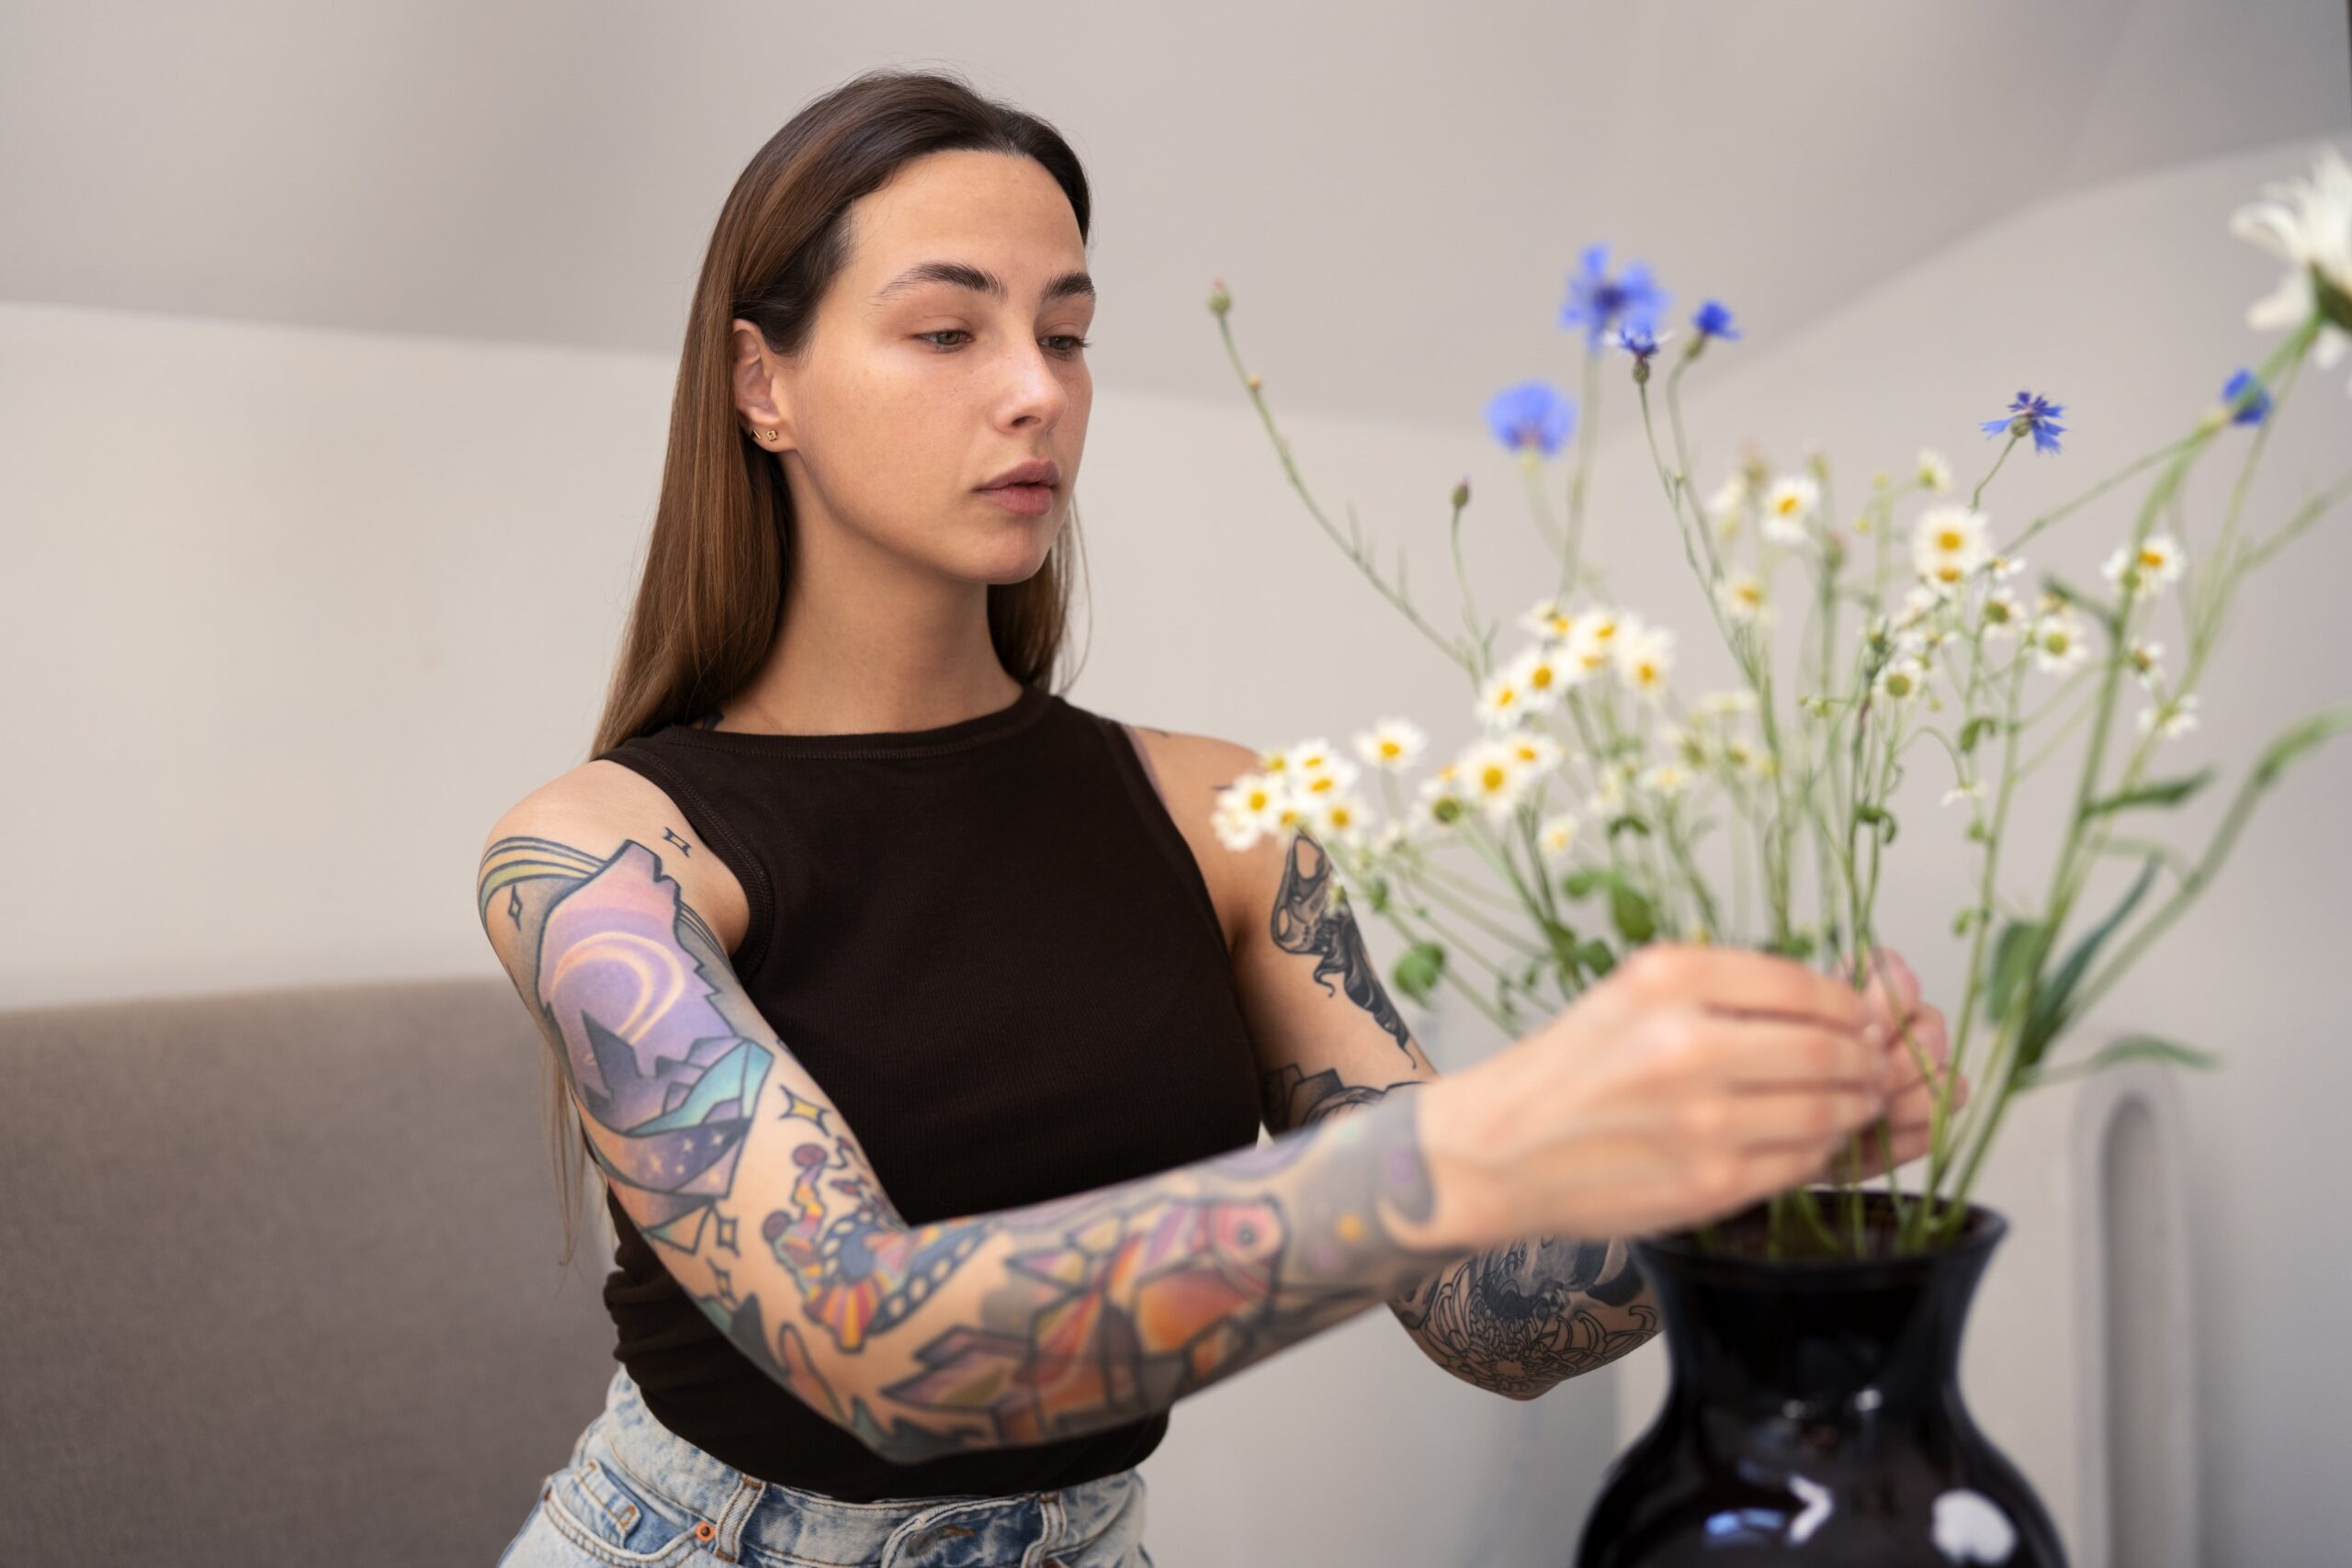 Tattoo care goes mainstream Tattooed lady with flowers